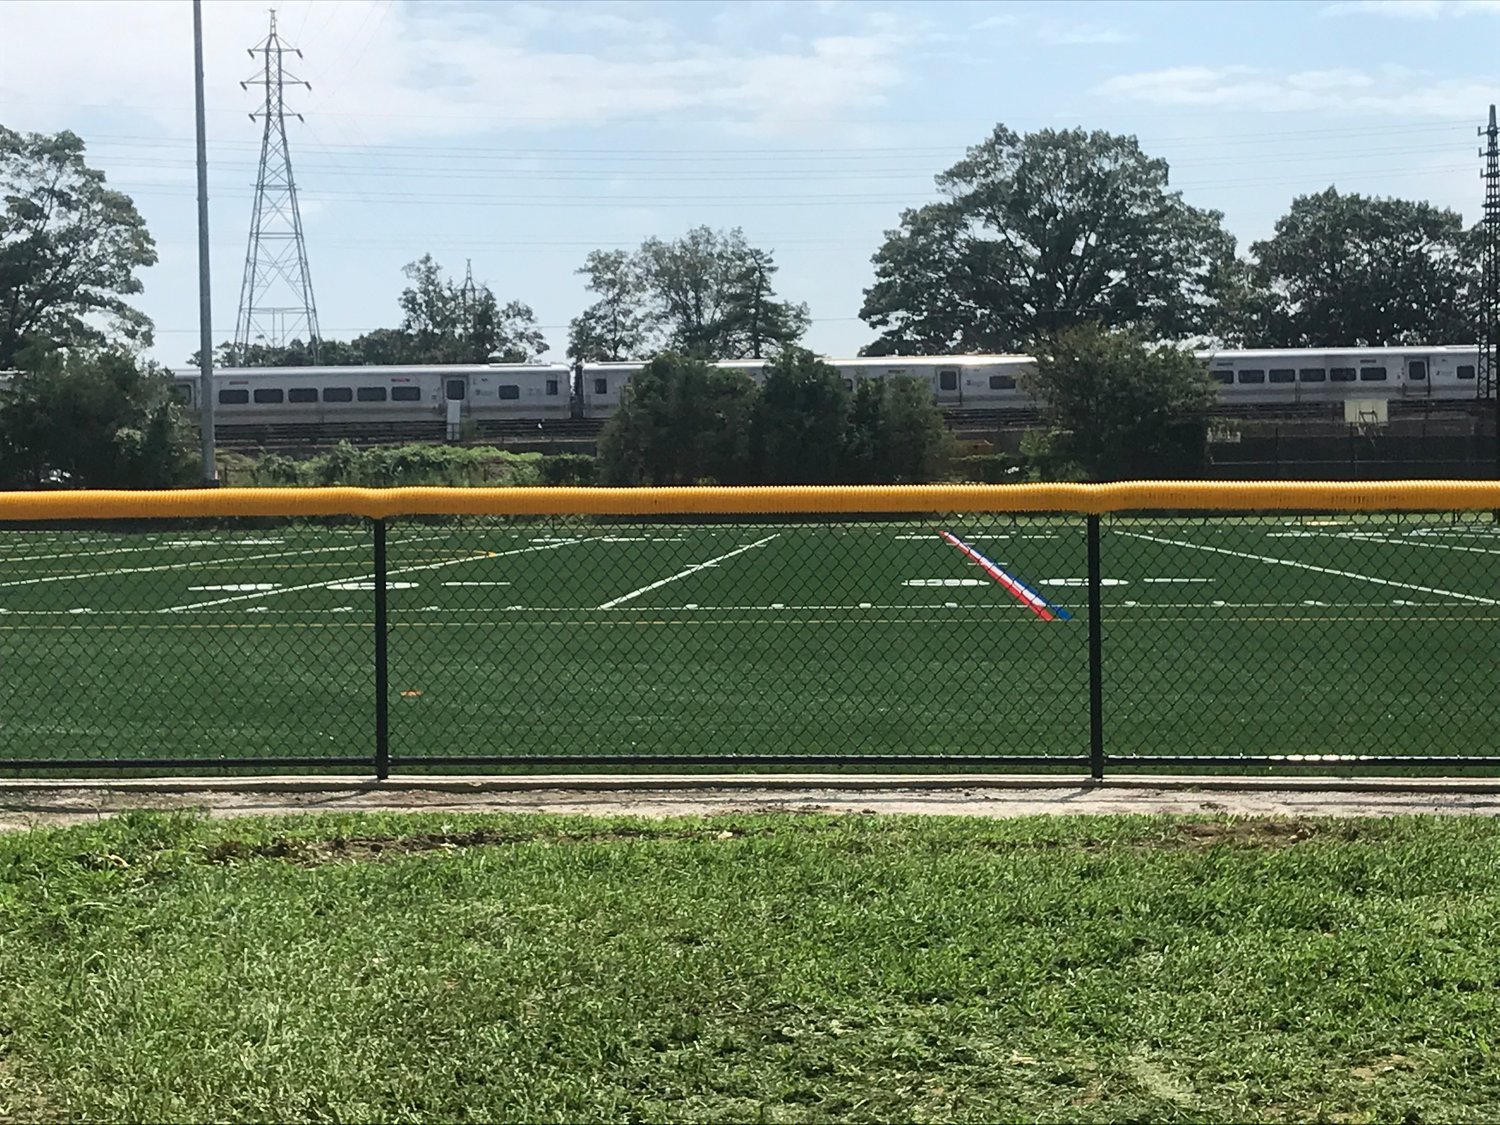 Artificial turf fields were installed at Greis Park late last year, and many more improvements are planned for the facility.